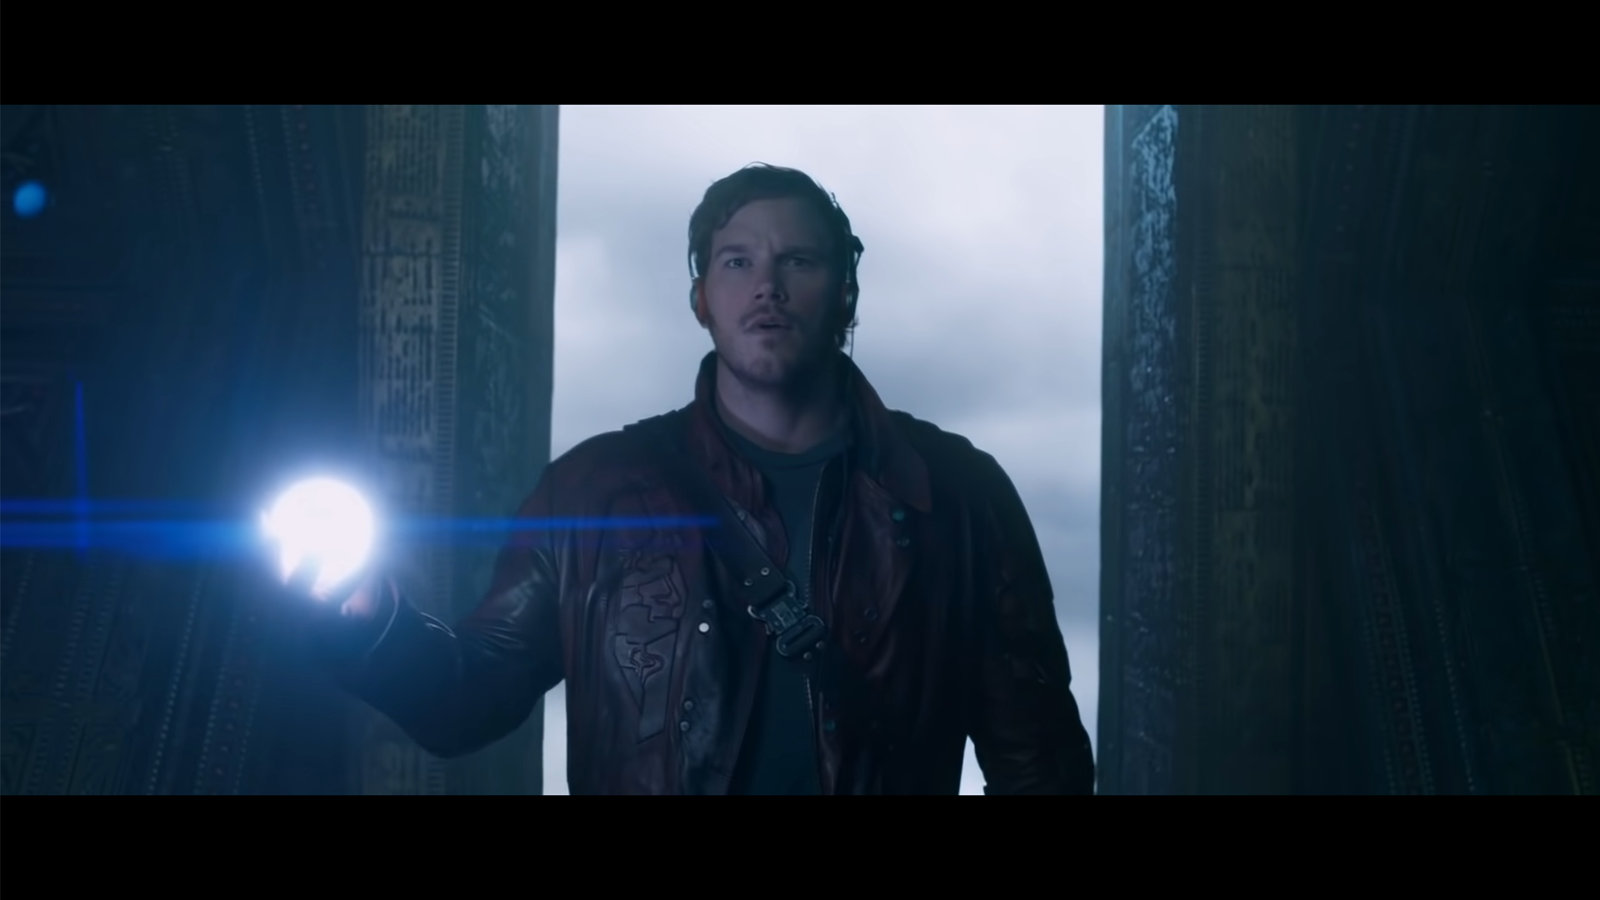 Starlord stands with a glowing orb